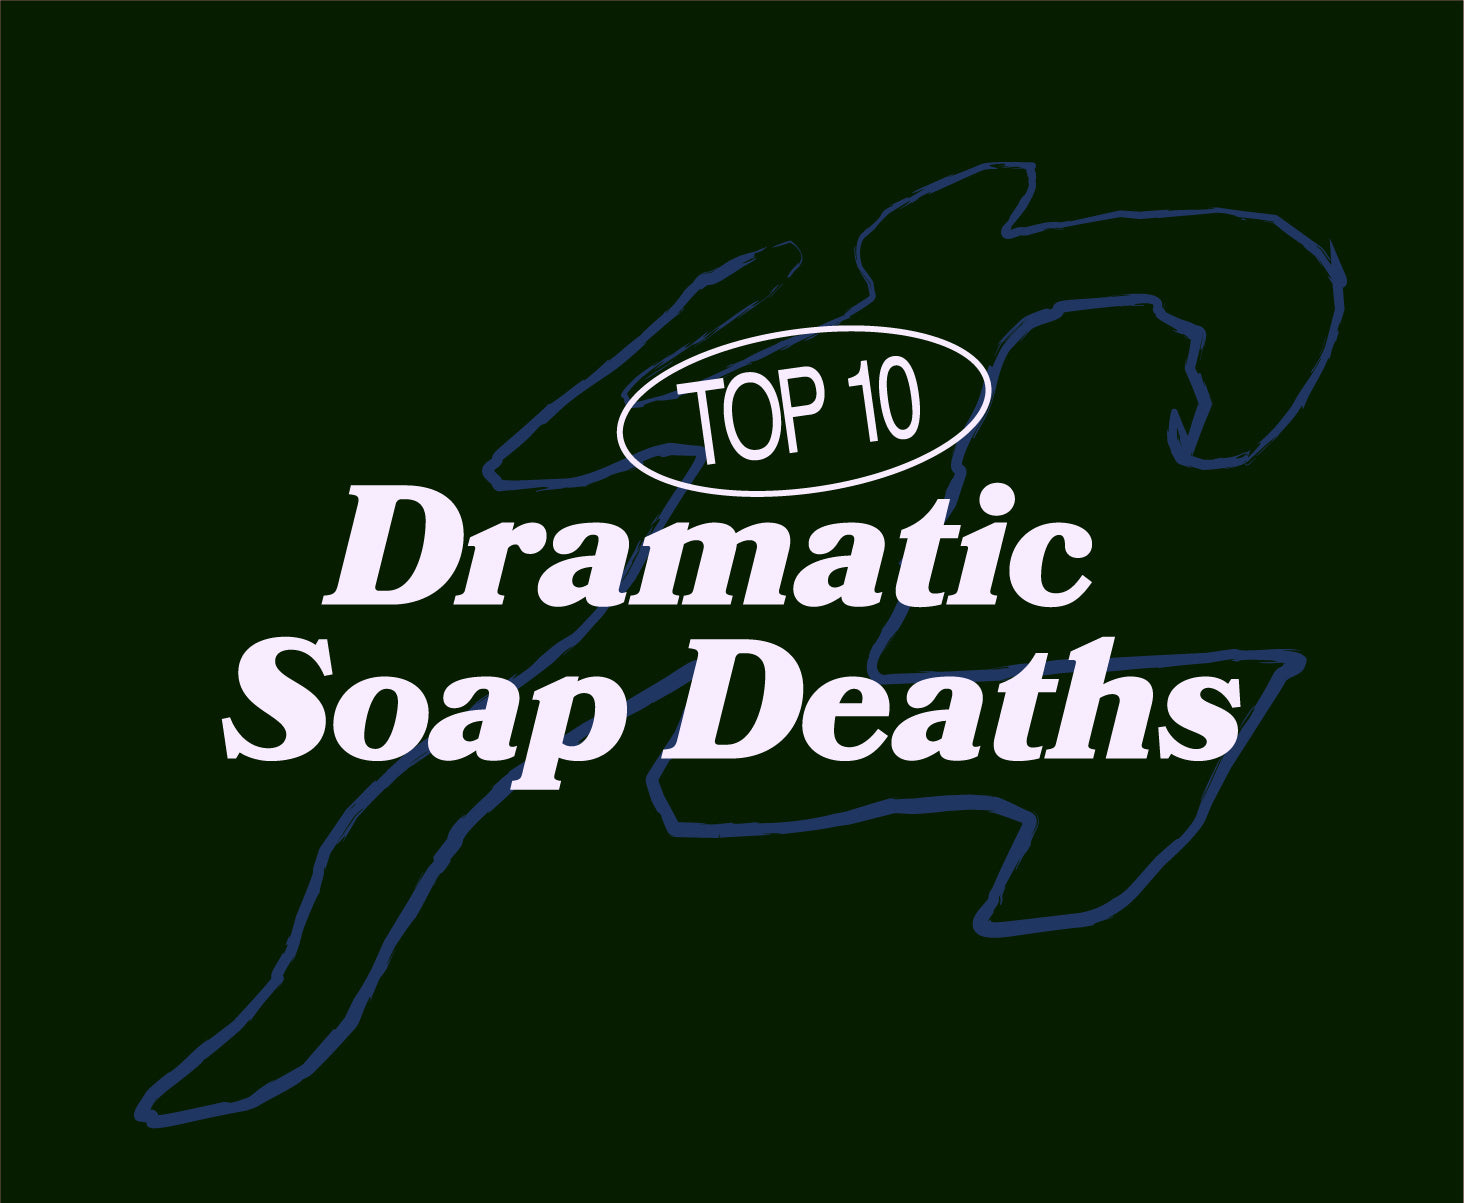 Top 10 Dramatic Soap Deaths